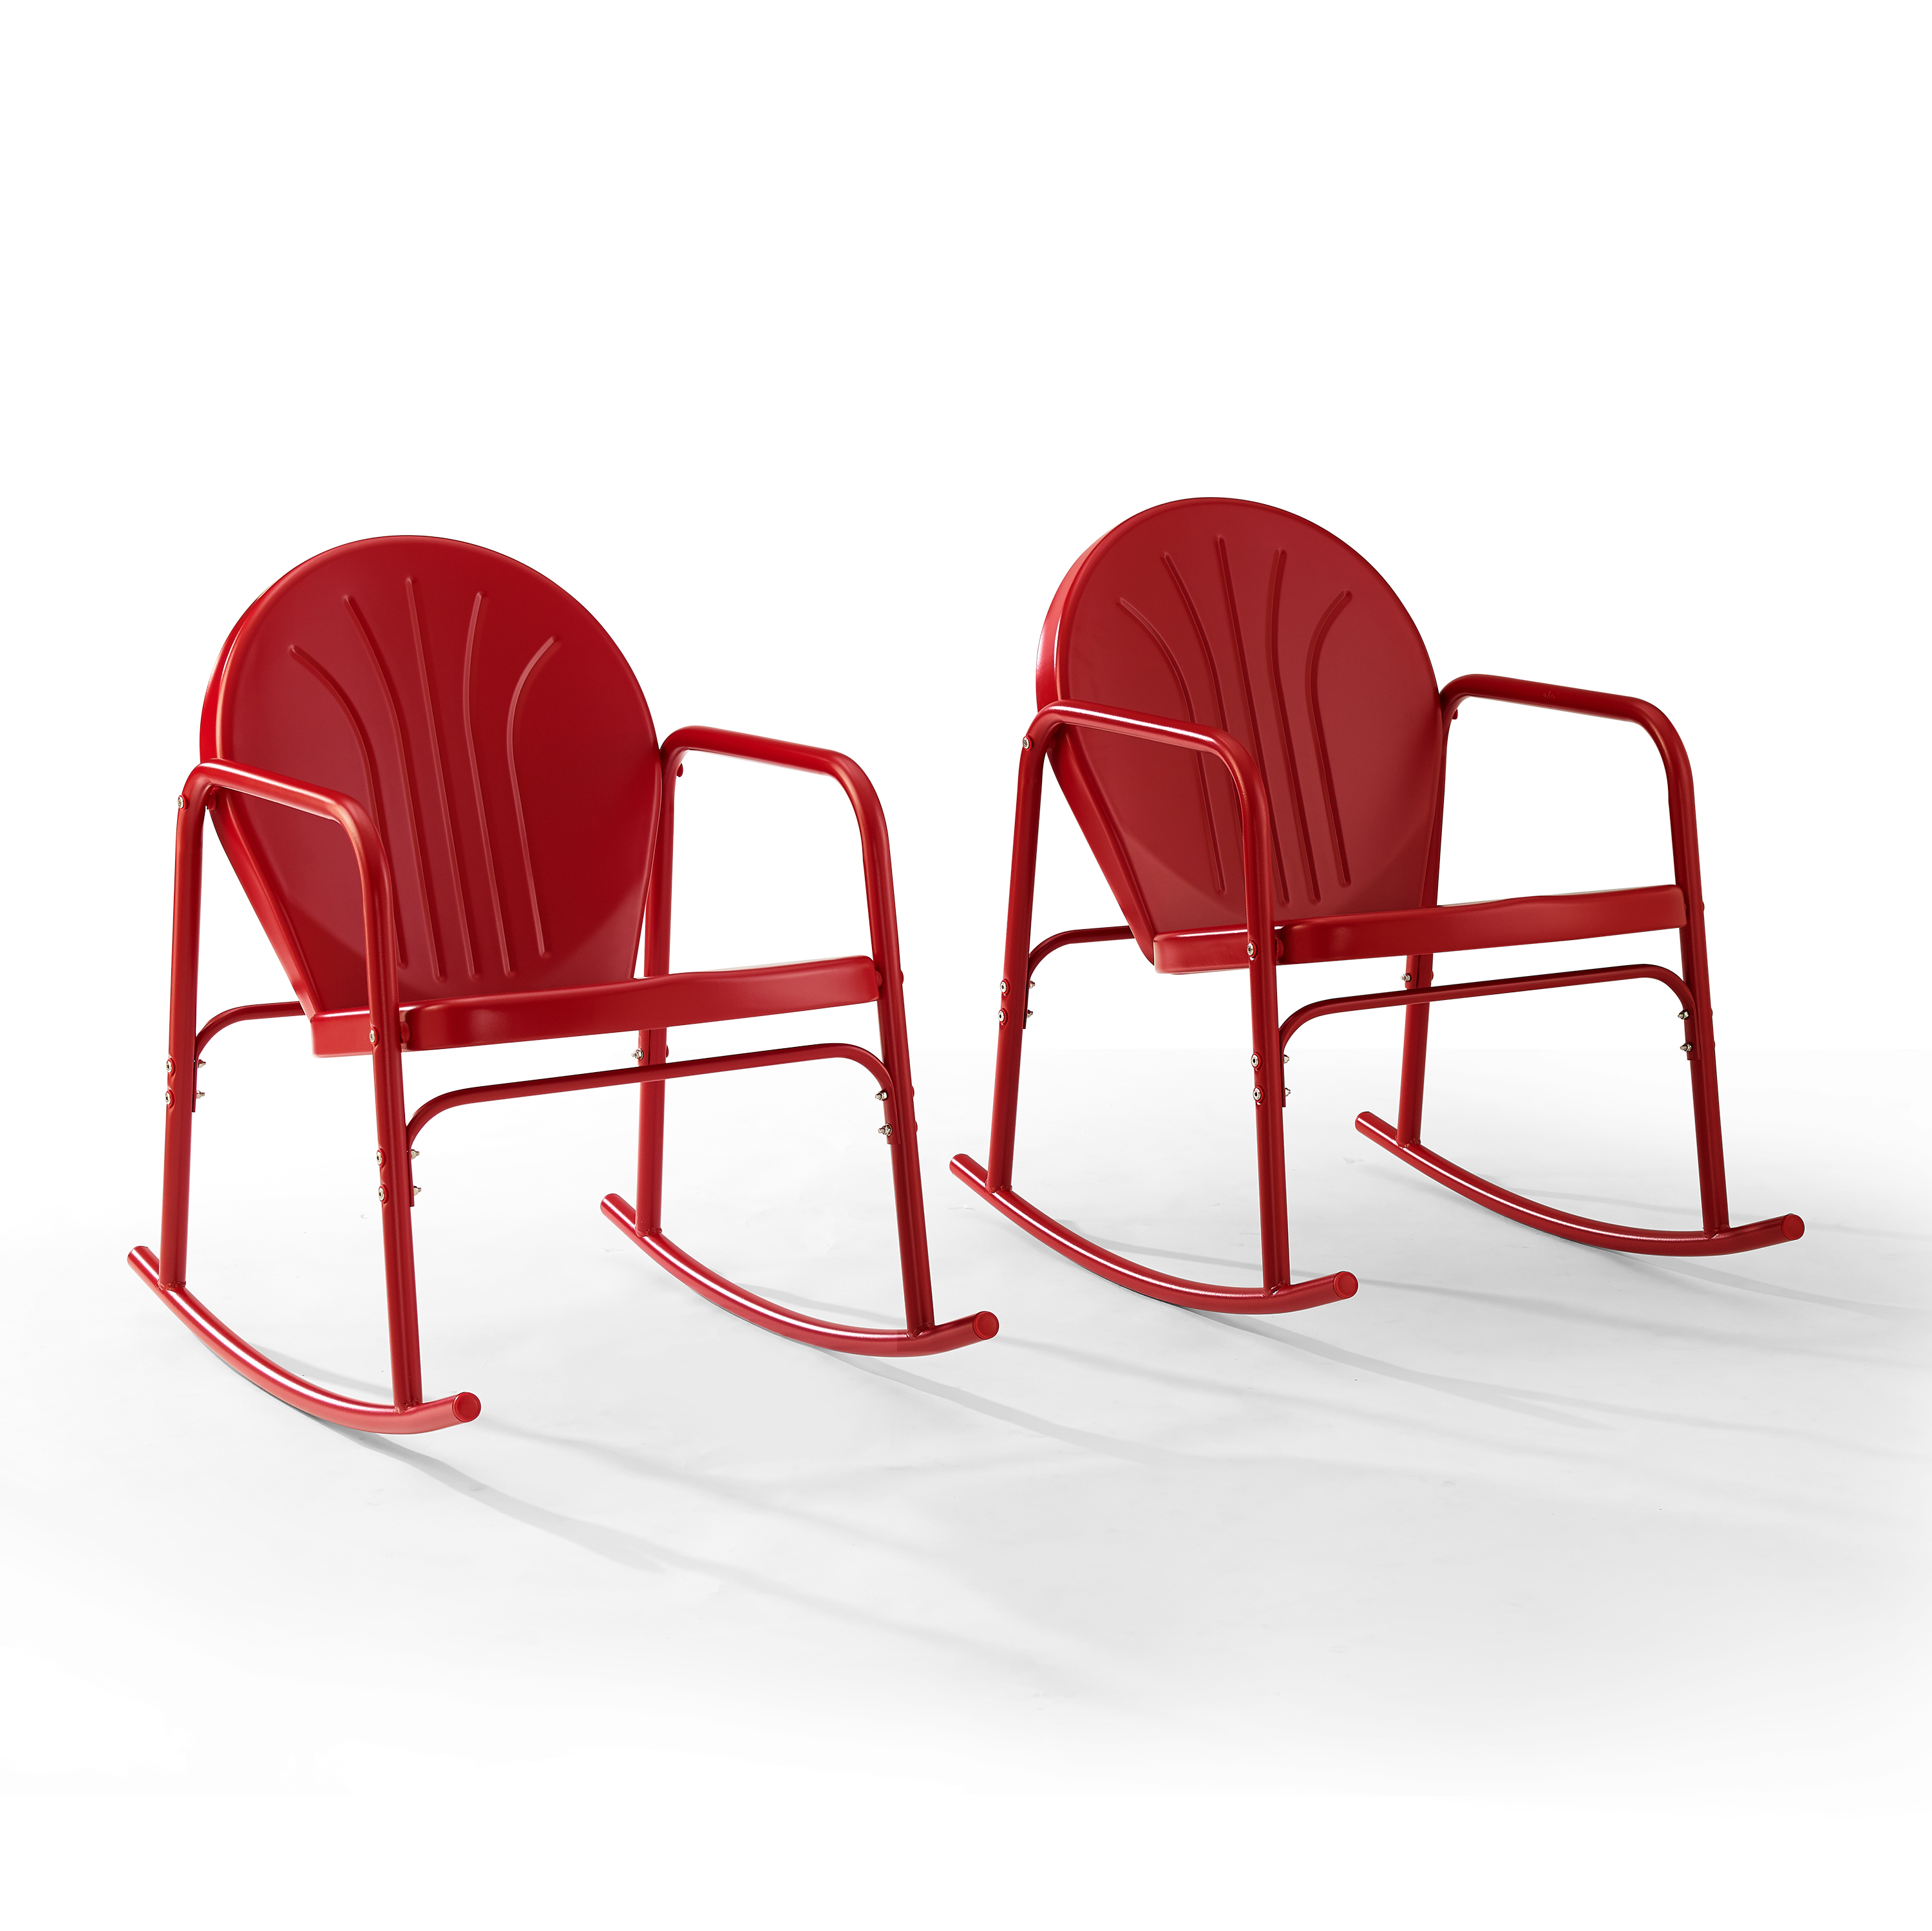 Crosley Furniture Griffith Metal Rocking Chair in Bright Red Gloss (Set of 2) - image 1 of 13